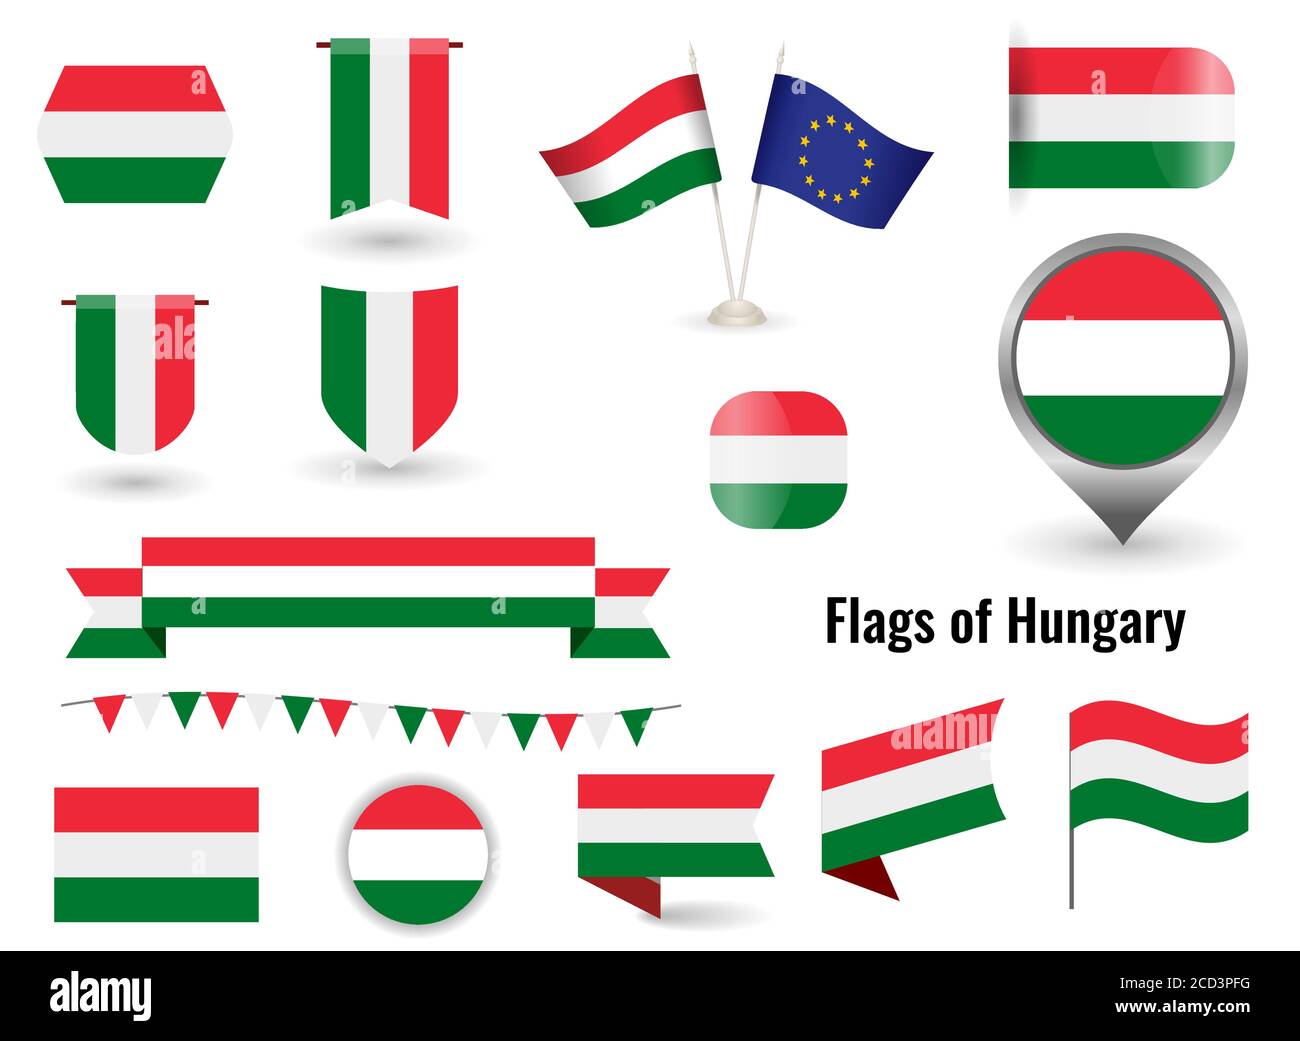 The Flag of Hungary. Big set of icons and symbols. Square and round Hungarian flag. Collection of different flags of horizontal and vertical. Stock Vector